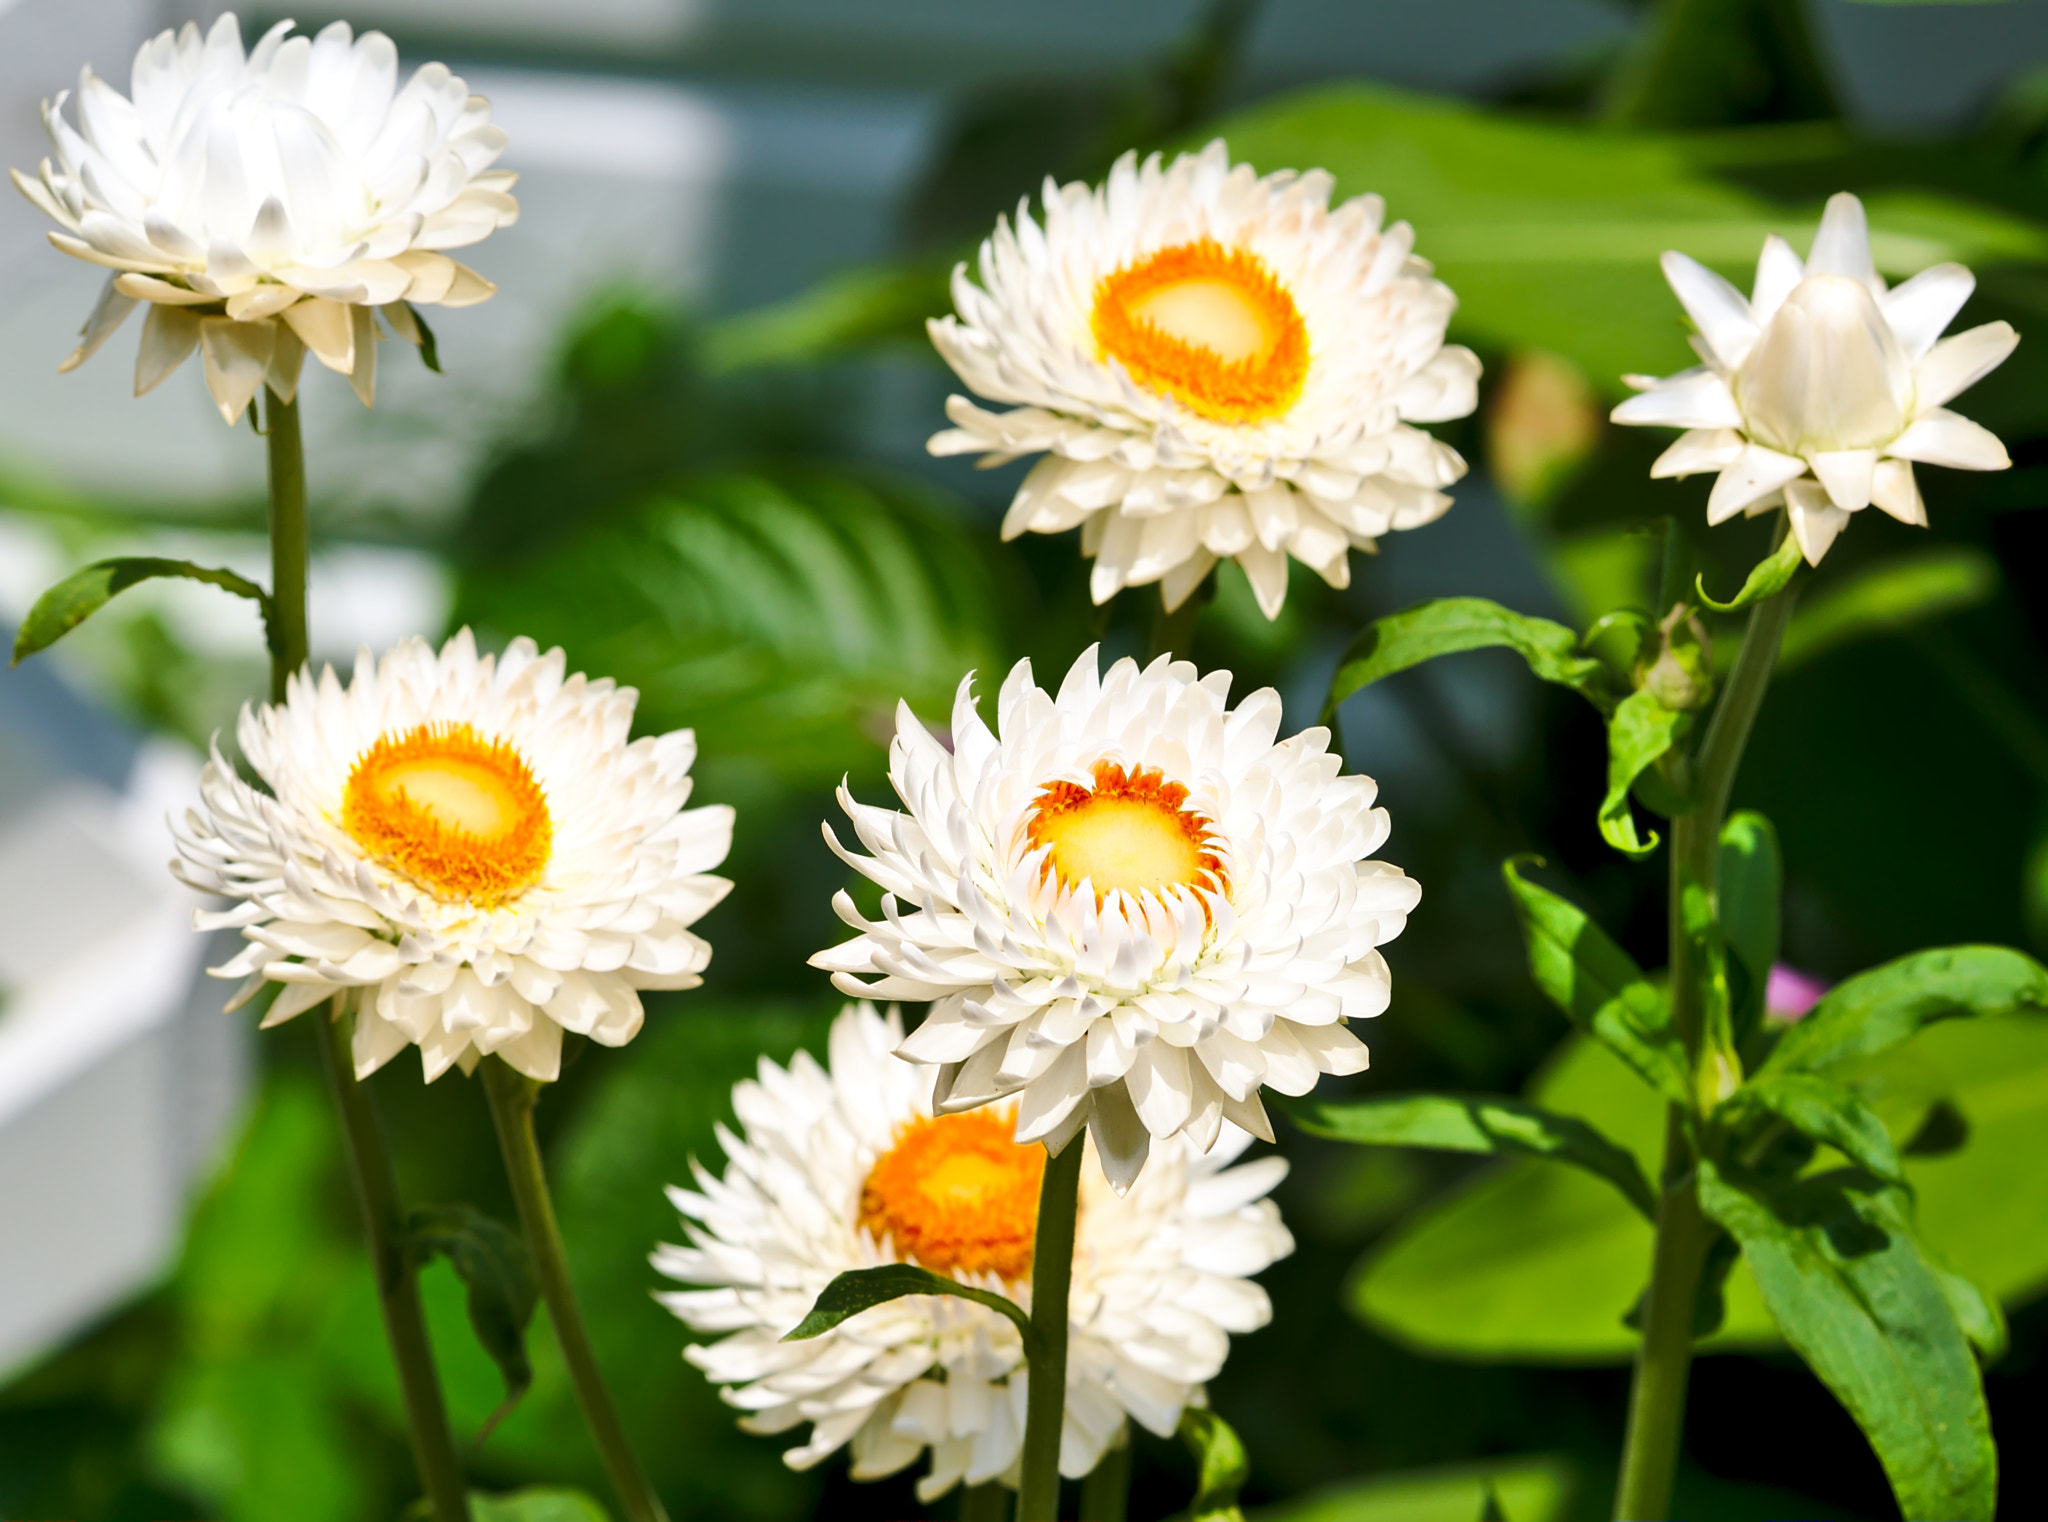 ZEISS Otus 85mm F1.4 sample photo. Daisies in the butterfly garden photography